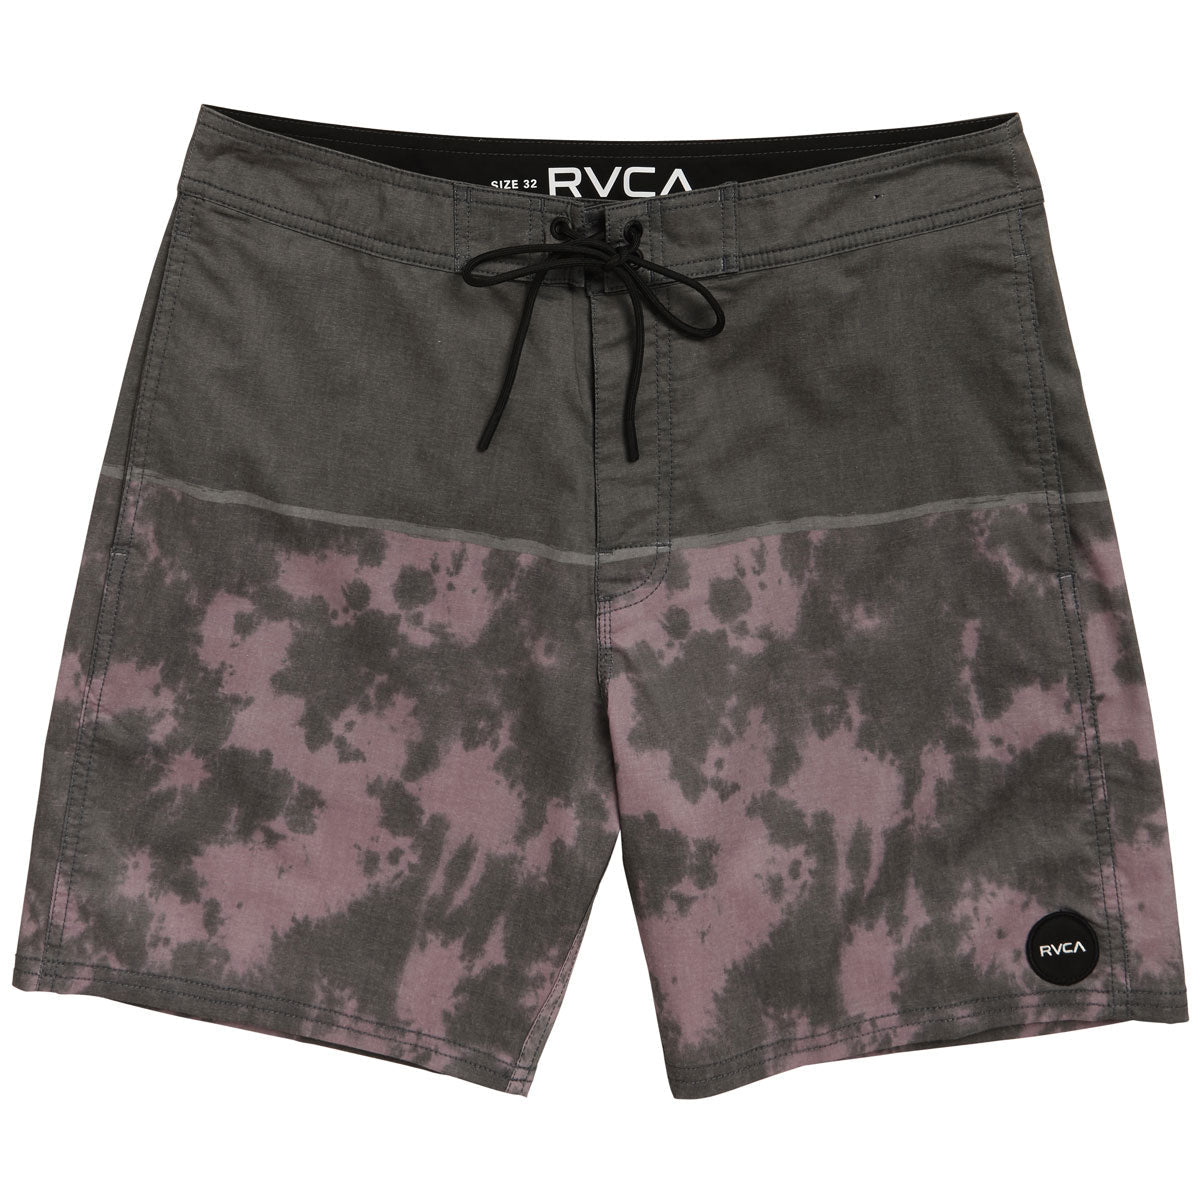 RVCA County Trunk Shorts - Lavender image 1